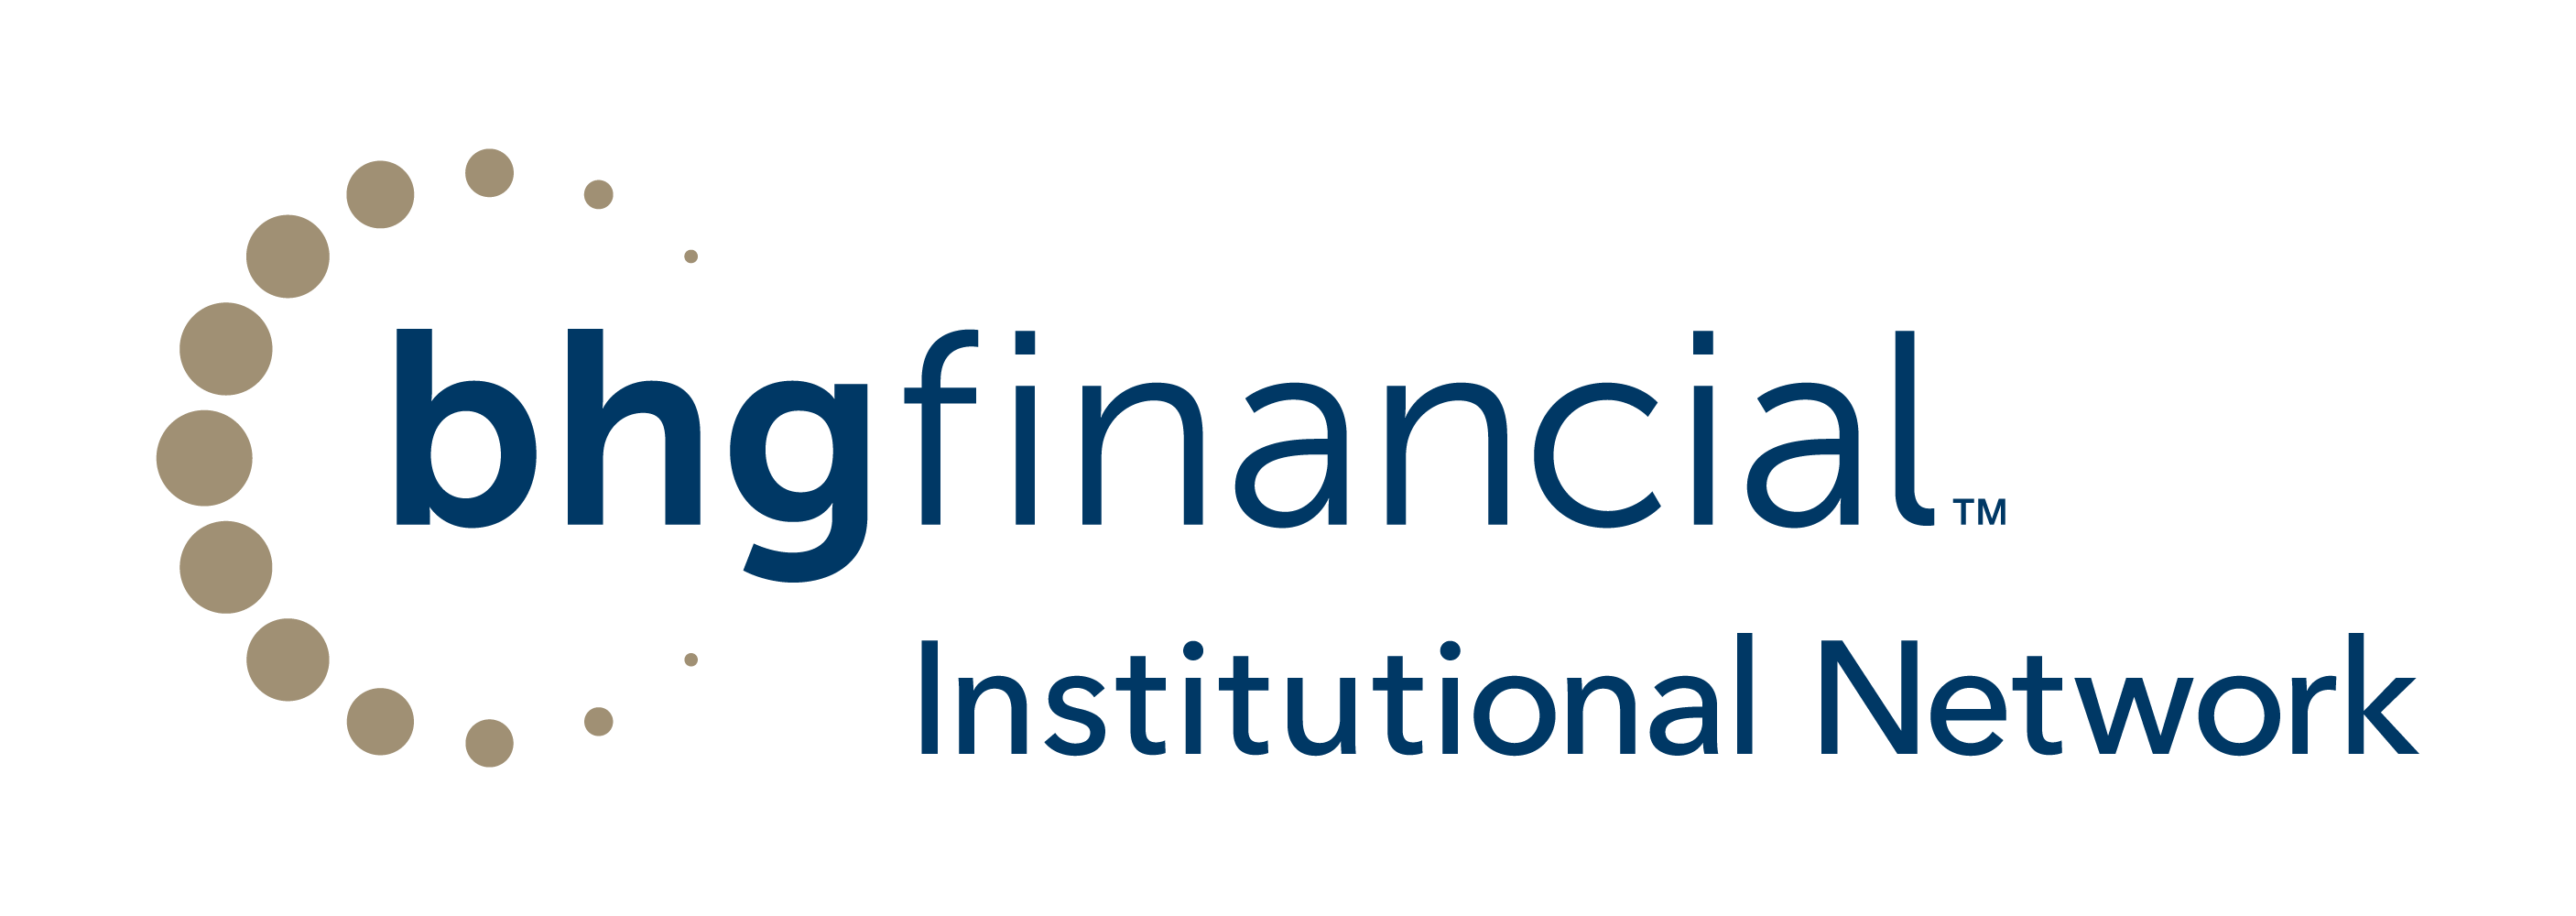 BHG Financial Institutional Network